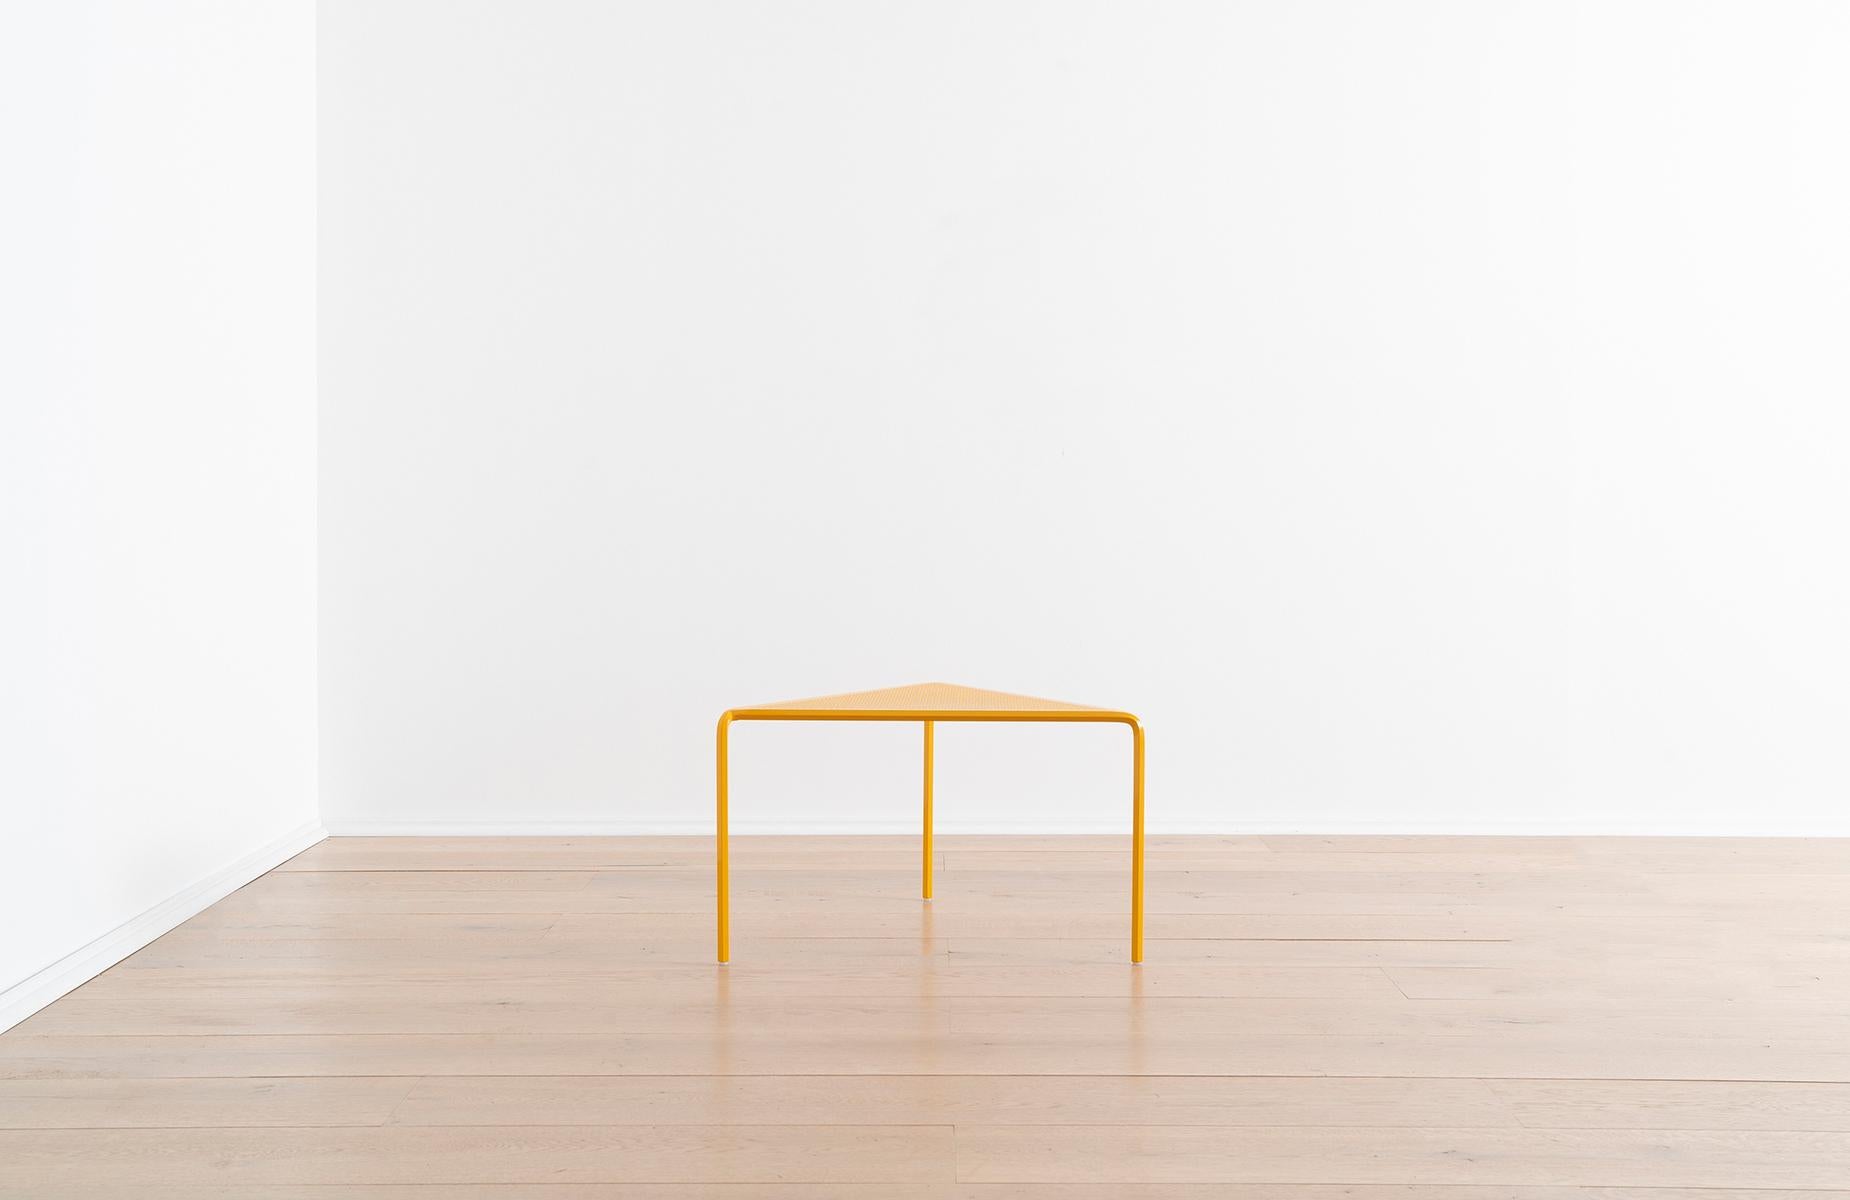 This industrial yellow steel coffee table could be the slim end table your living room sofa or lounge chair is missing, the sturdy bedside table you and your water glass have been dreaming of, or the boost of support your favorite plant needs to